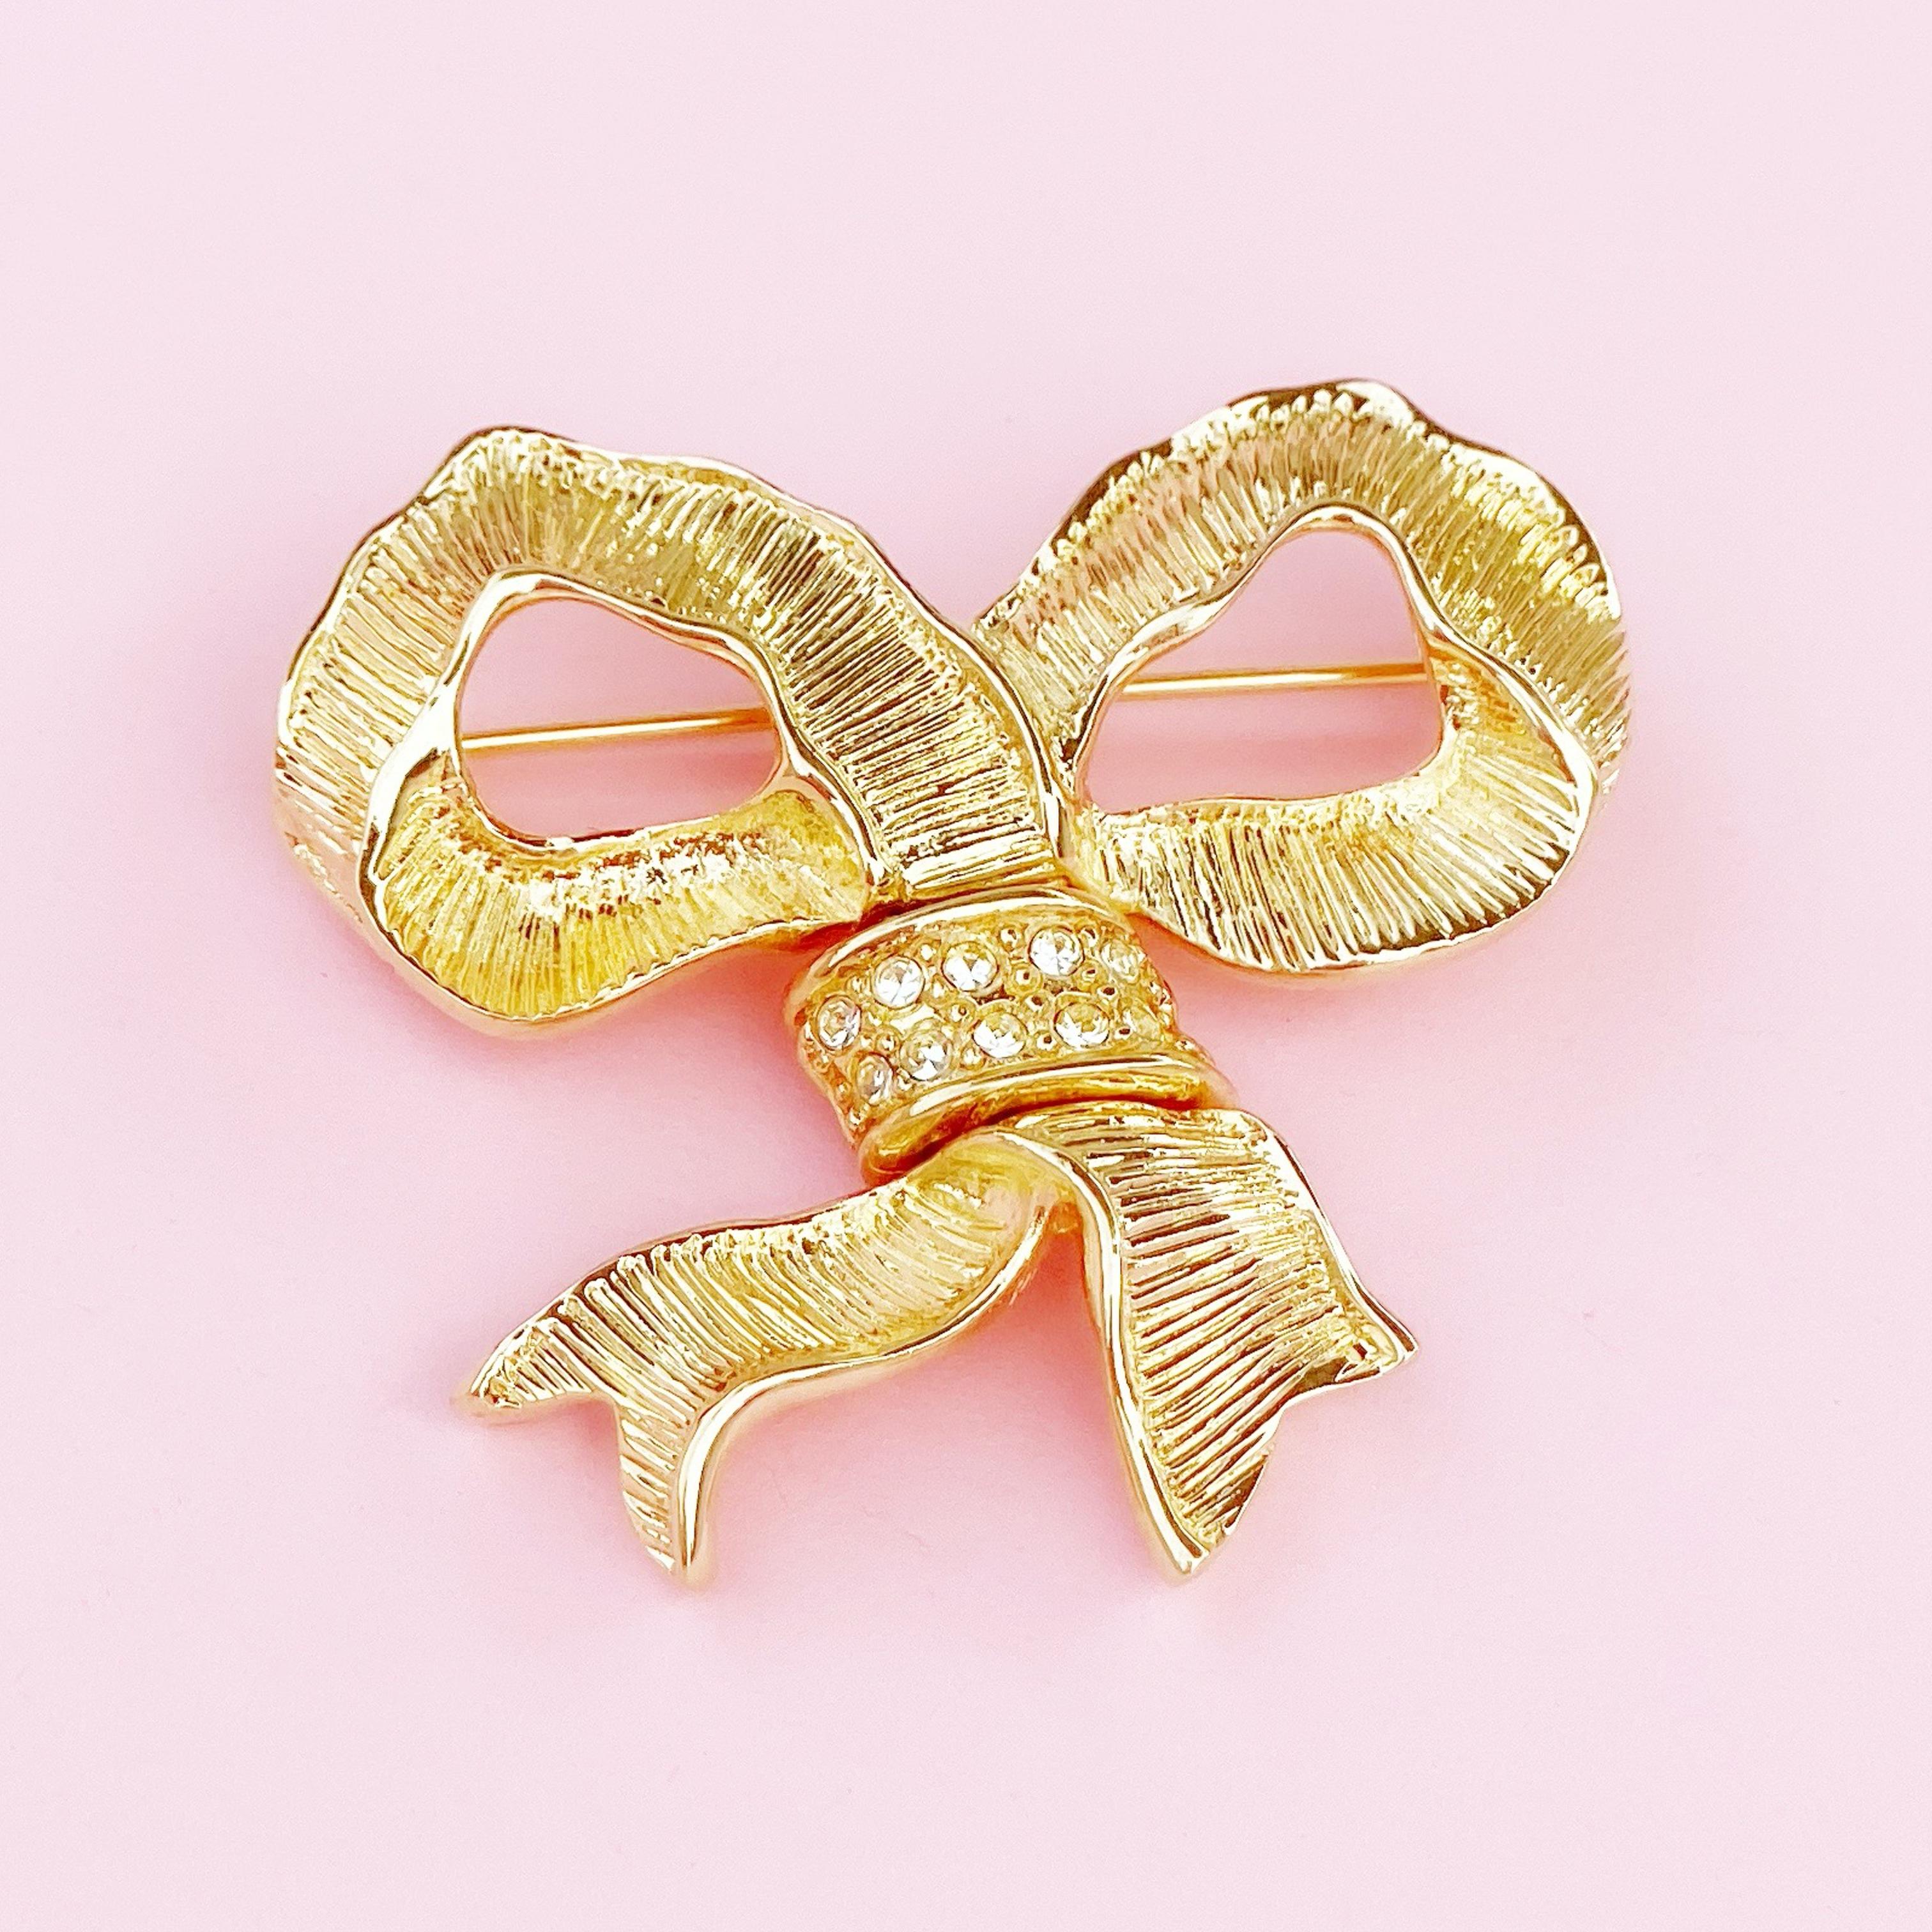 Modern Textured Gold Bow Brooch With Crystal Rhinestone Accents, 1980s